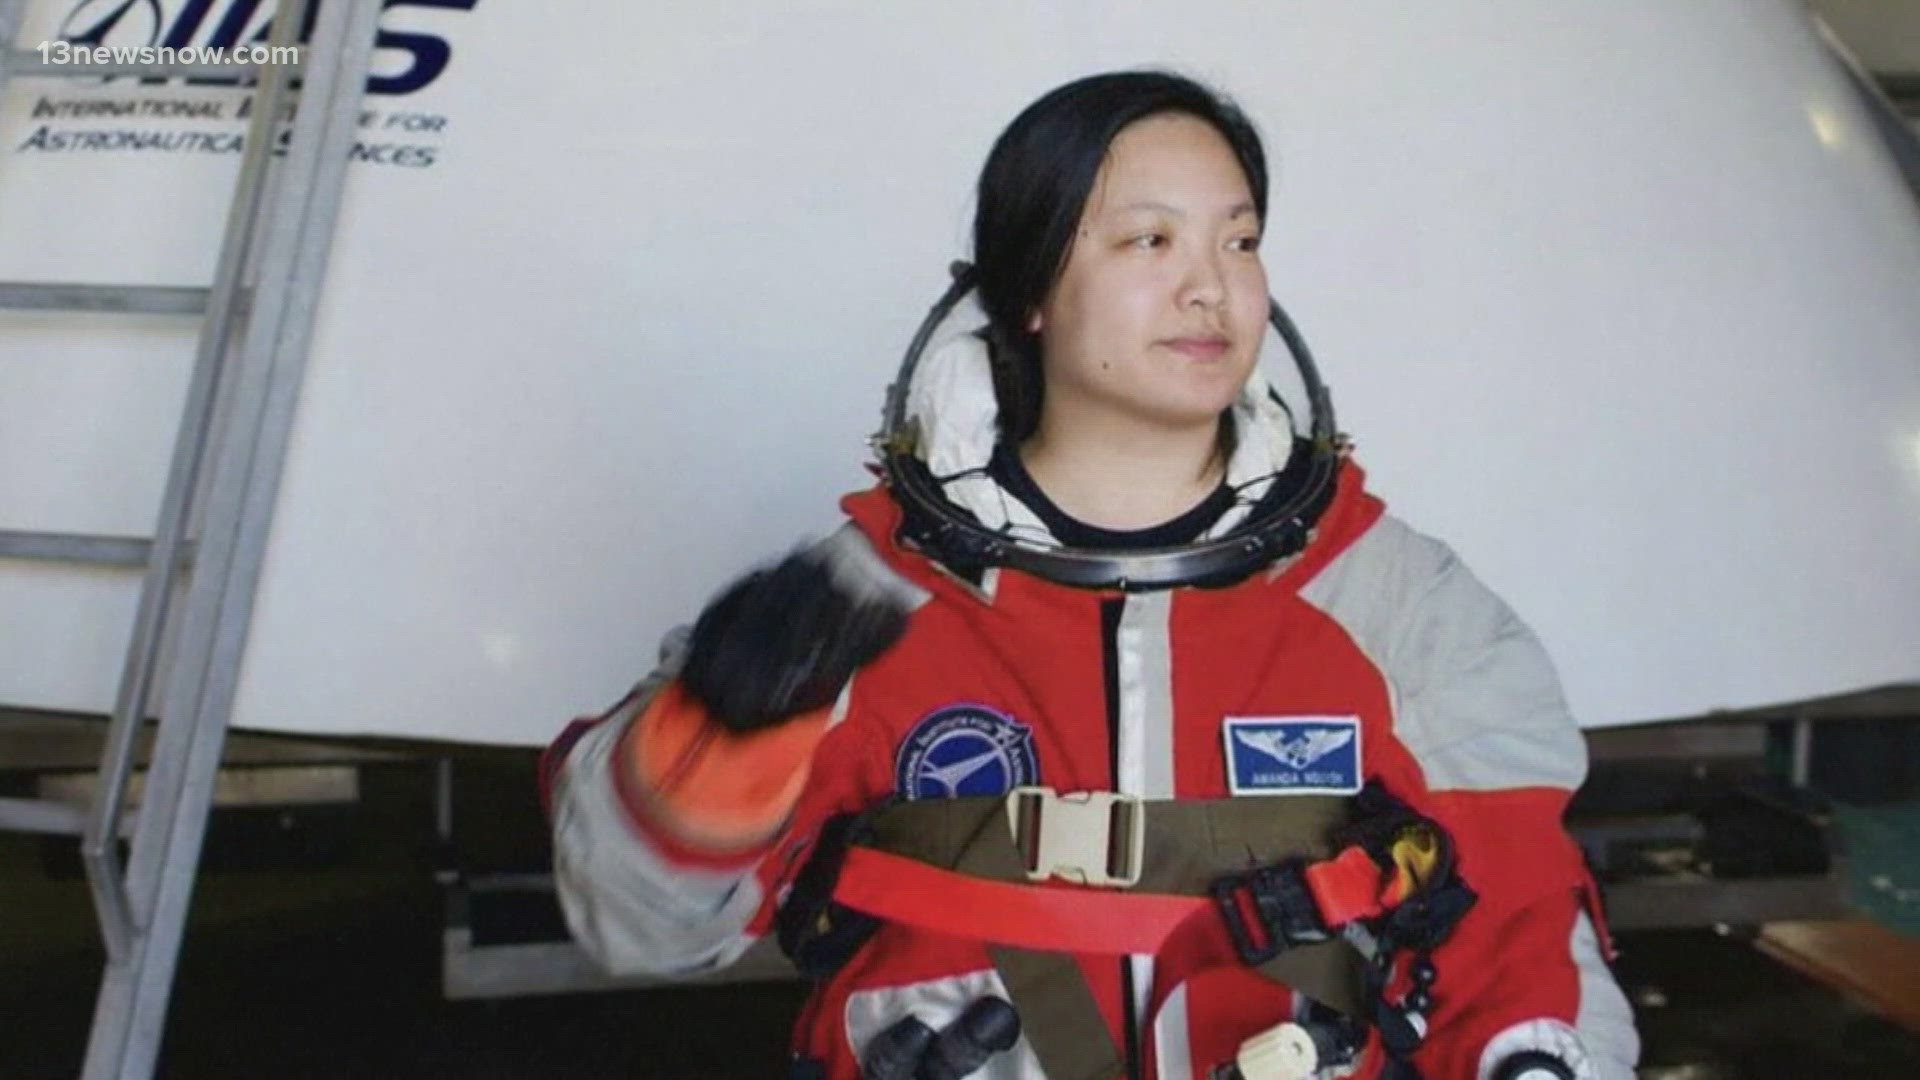 ABC's Juju Chang spoke with a Nobel Peace Prize nominee, activist, and astronaut who is set to make history as the first Vietnamese woman in space.